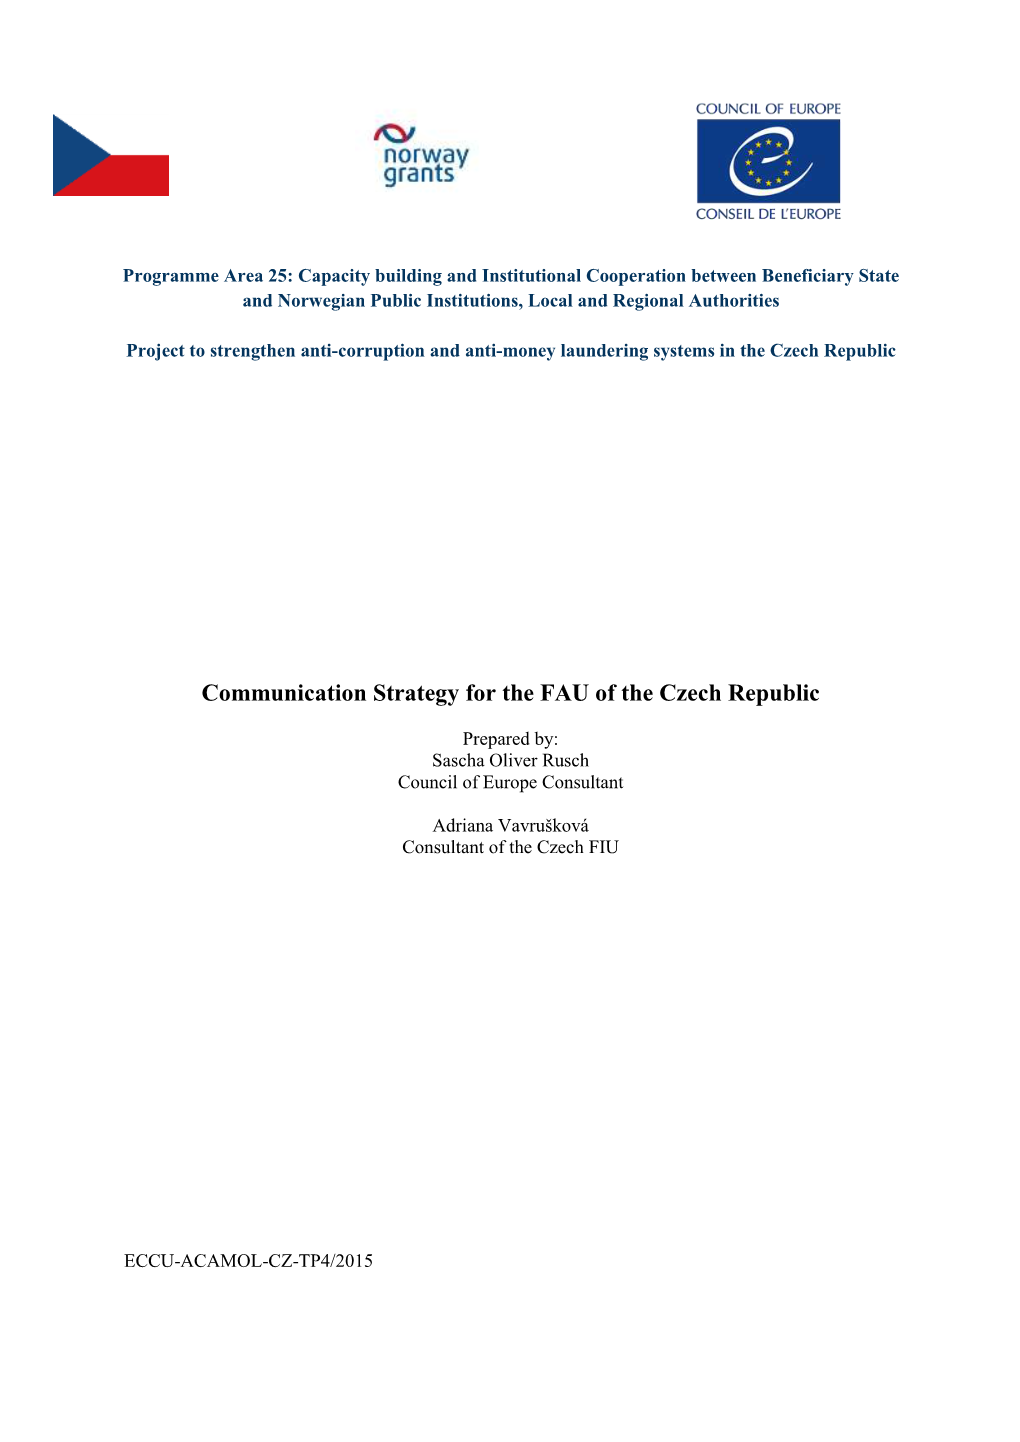 Communication Strategy for the FAU of the Czech Republic